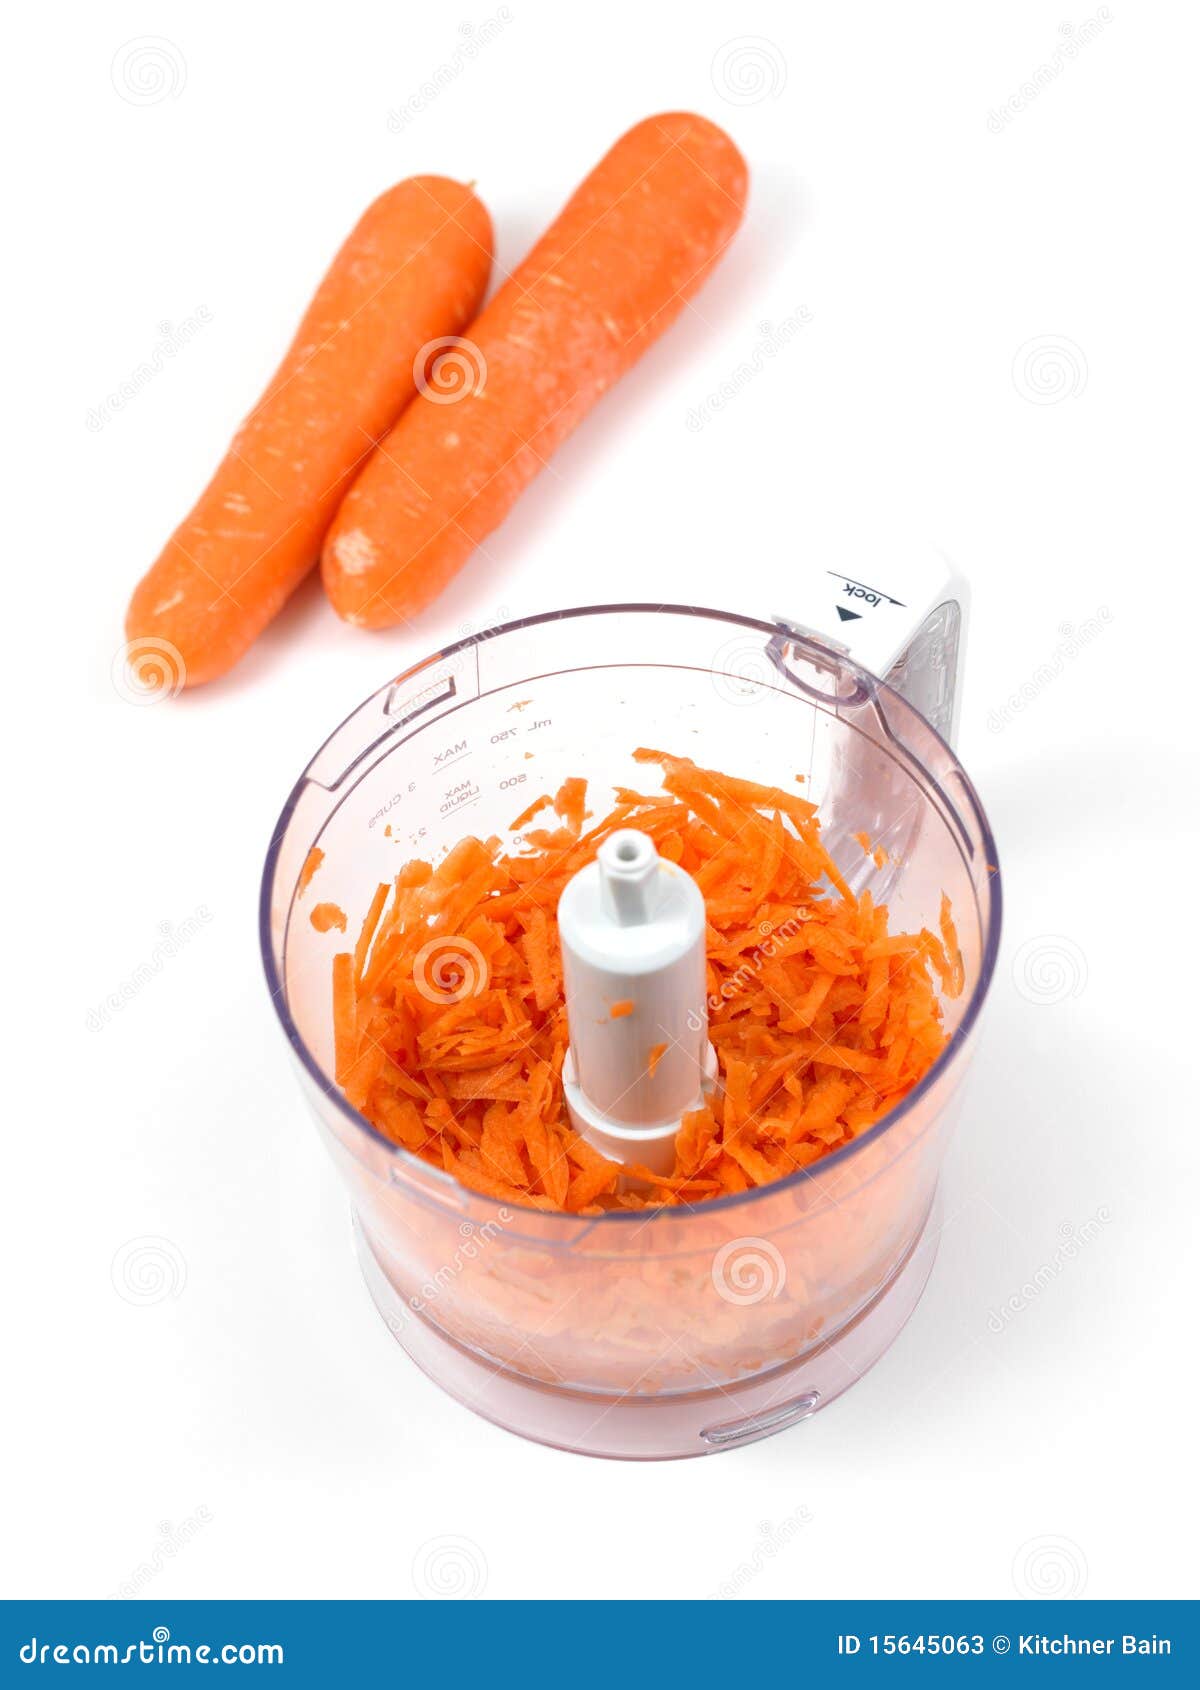 Chopping Carrots Fine Grater Using Electric Food Processor Stock Photo by  ©andreygonchar 350936044